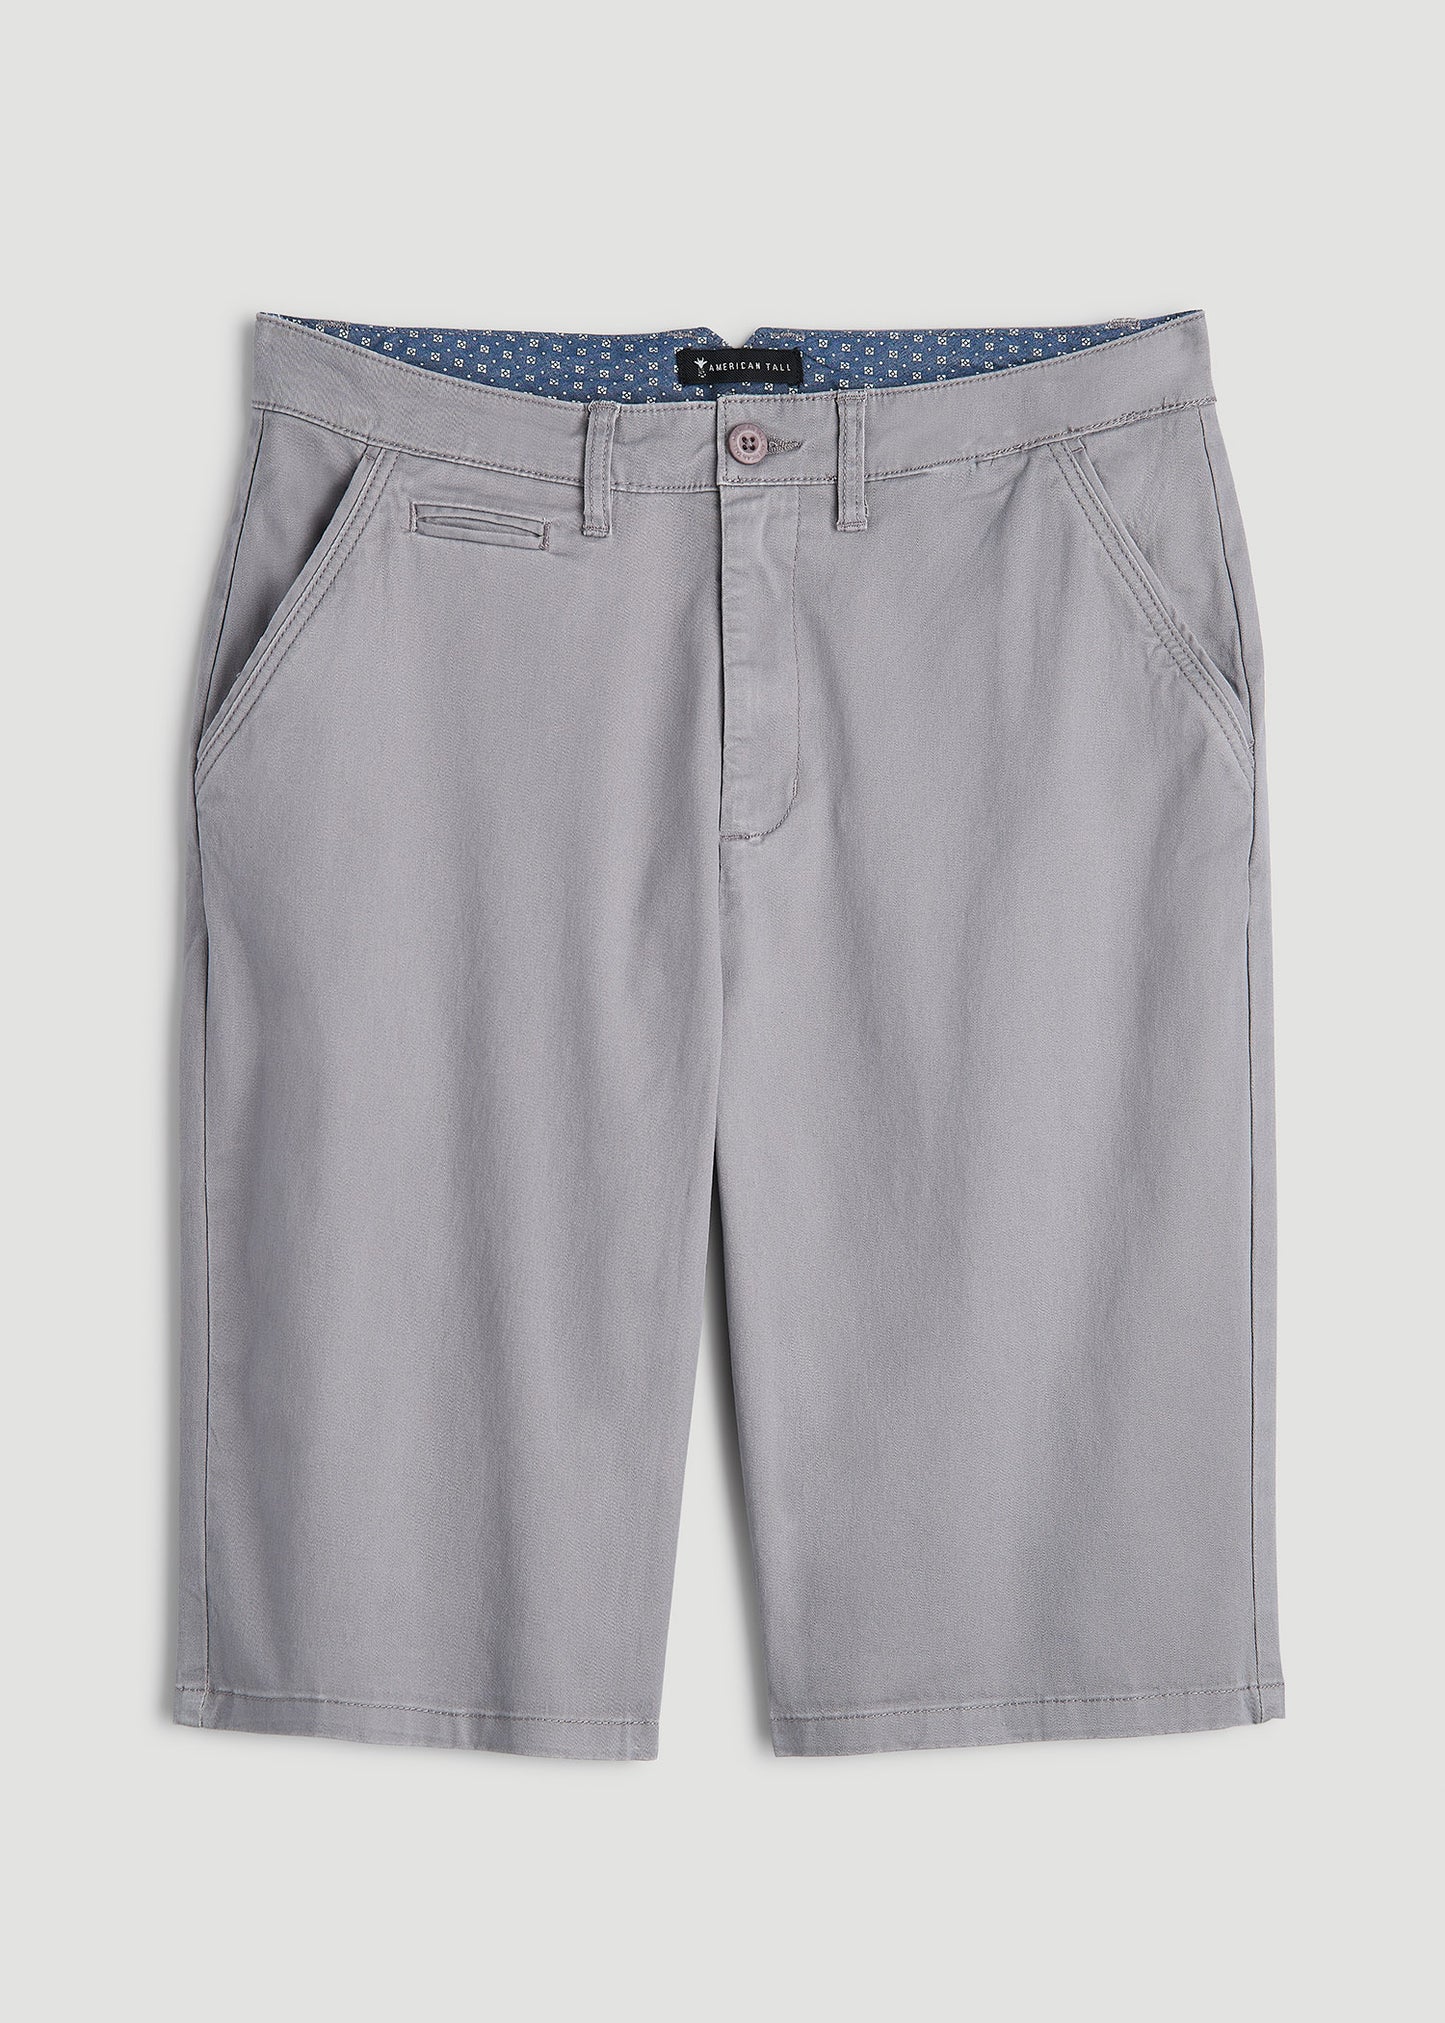 Chino Shorts for Tall Men in Pebble Grey